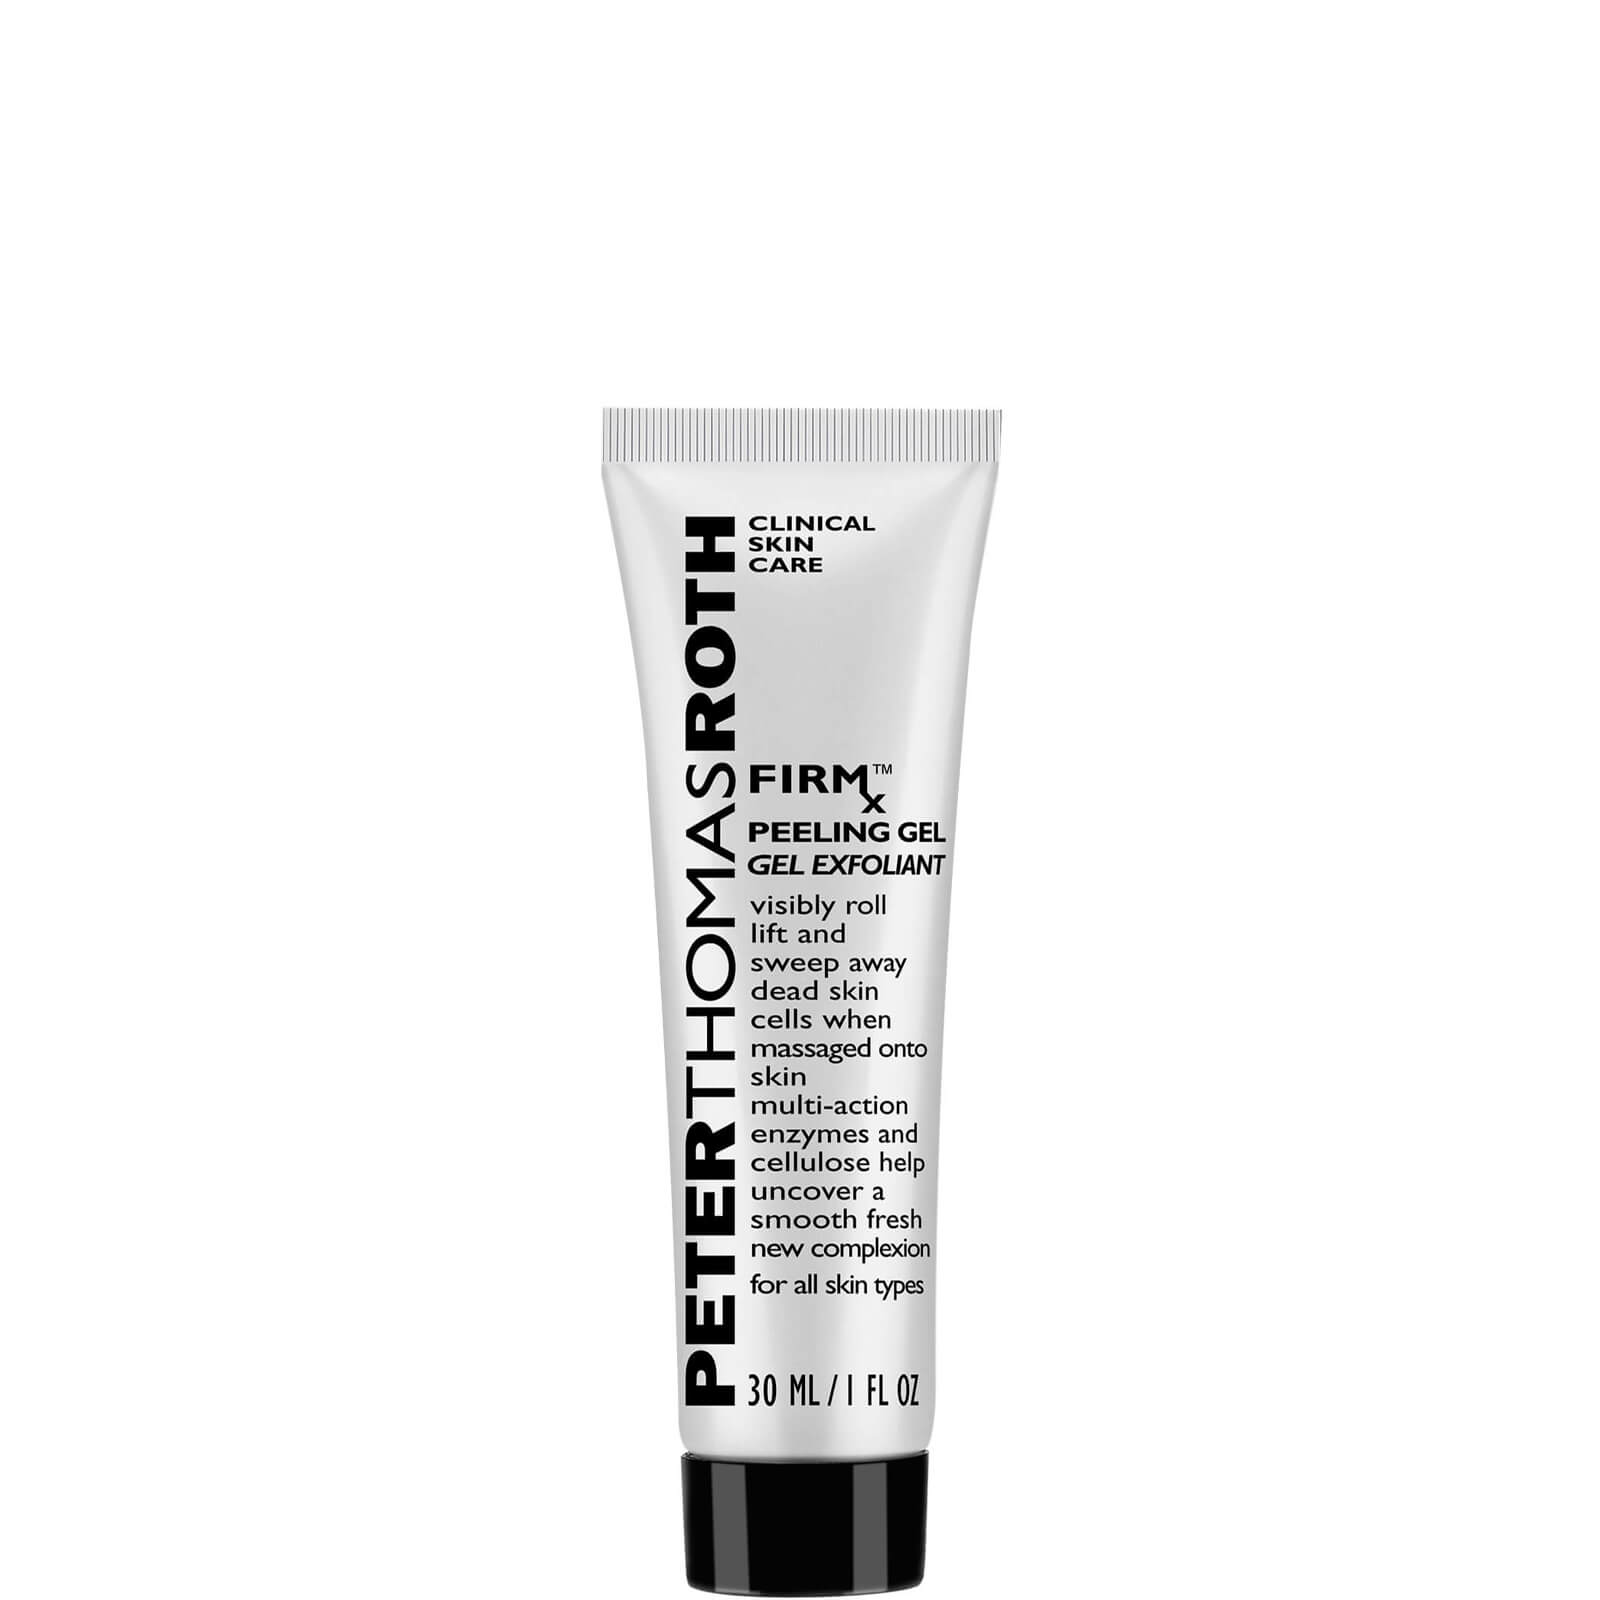 Photos - Facial / Body Cleansing Product Peter Thomas Roth Firm X Peeling Gel Travel Size 30ml 12-03-001